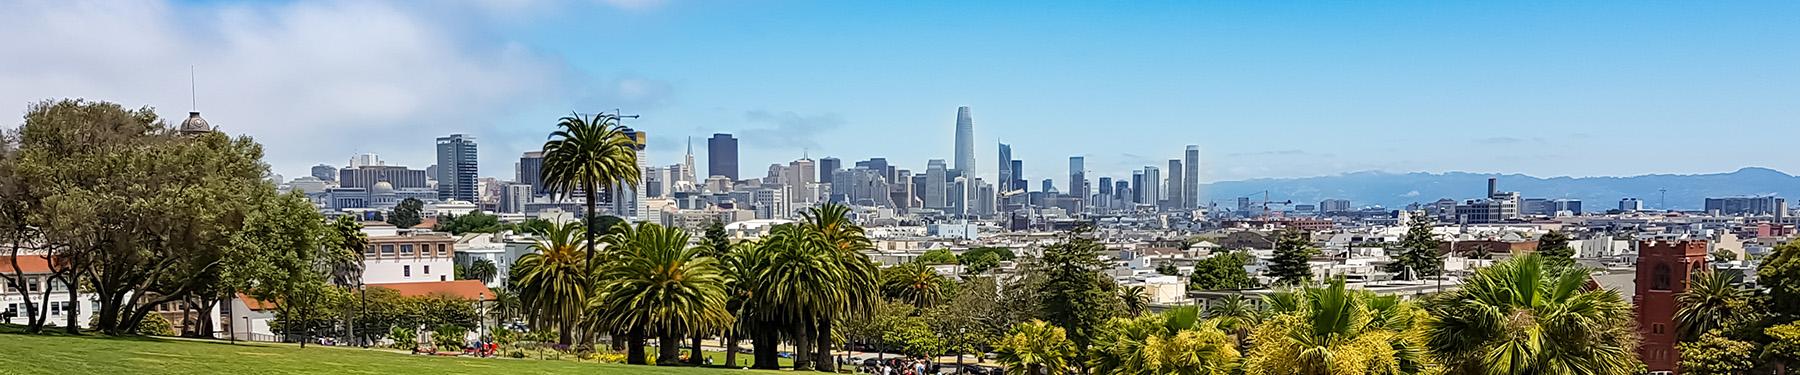 Panoramic Skyline of San Francisco as seen from top of Dolores Park. 